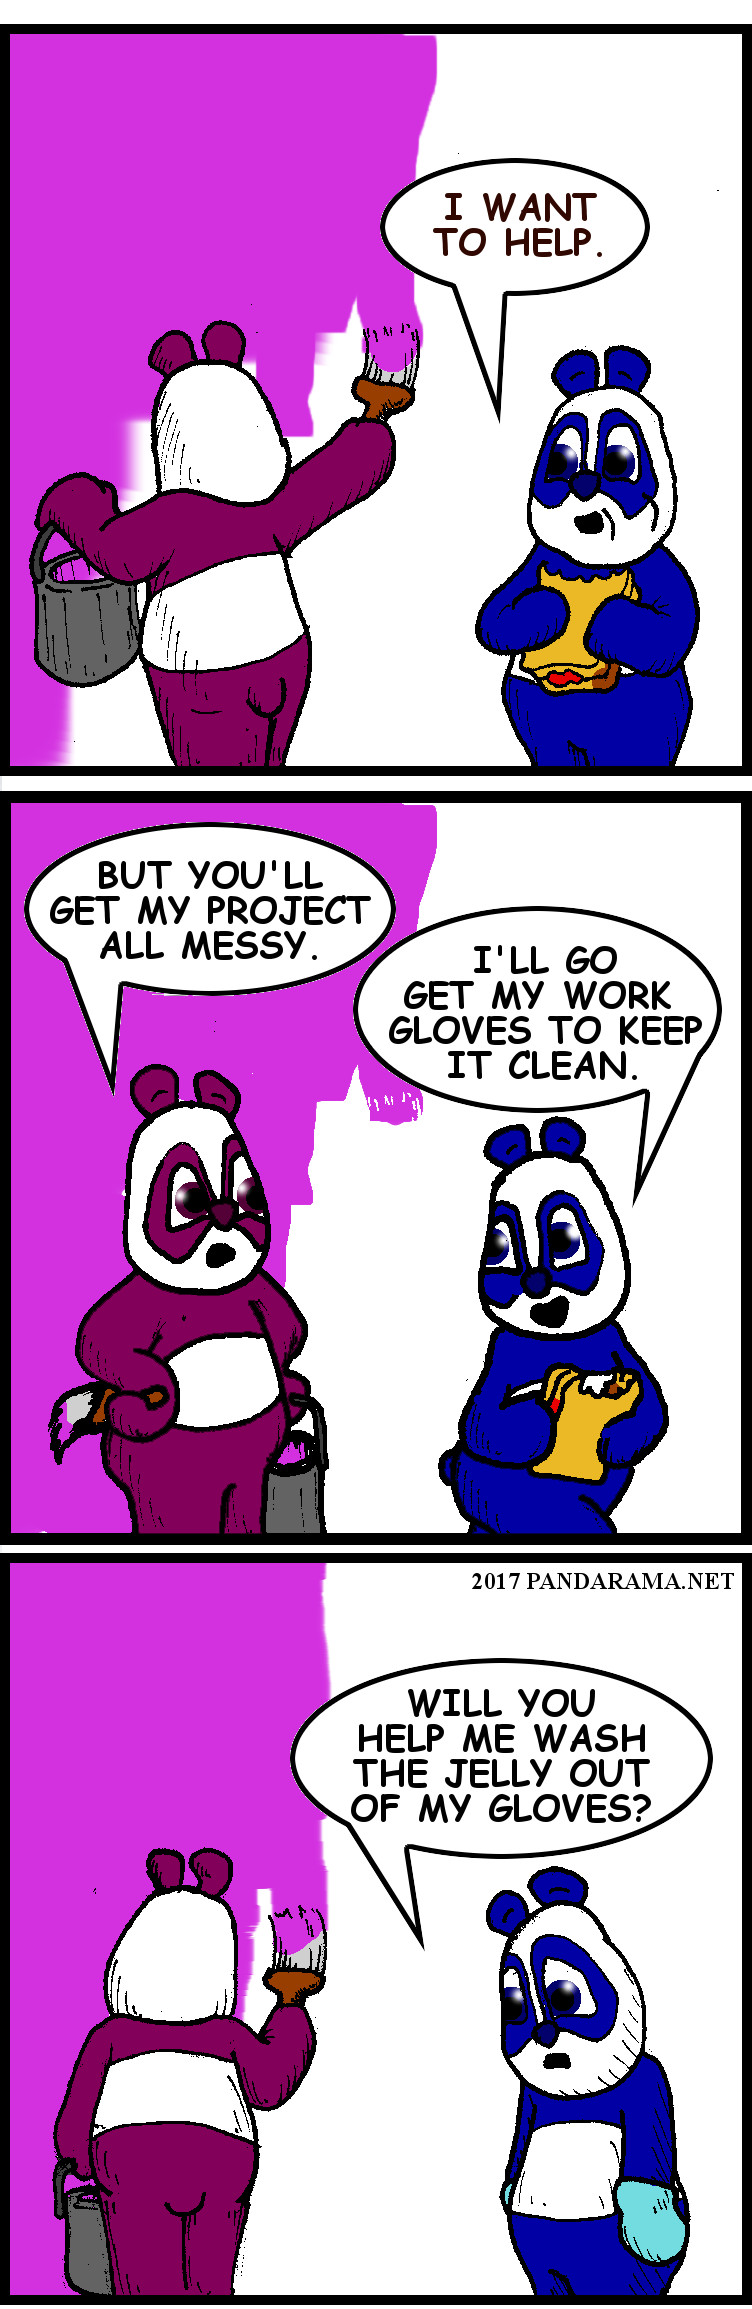 panda puts on work glvoes to keep jelly covered hands off painting project, but gets gloves full of jelly. peanutbutter jelly time cartoon. panda webcomic. pandarama webcomic.